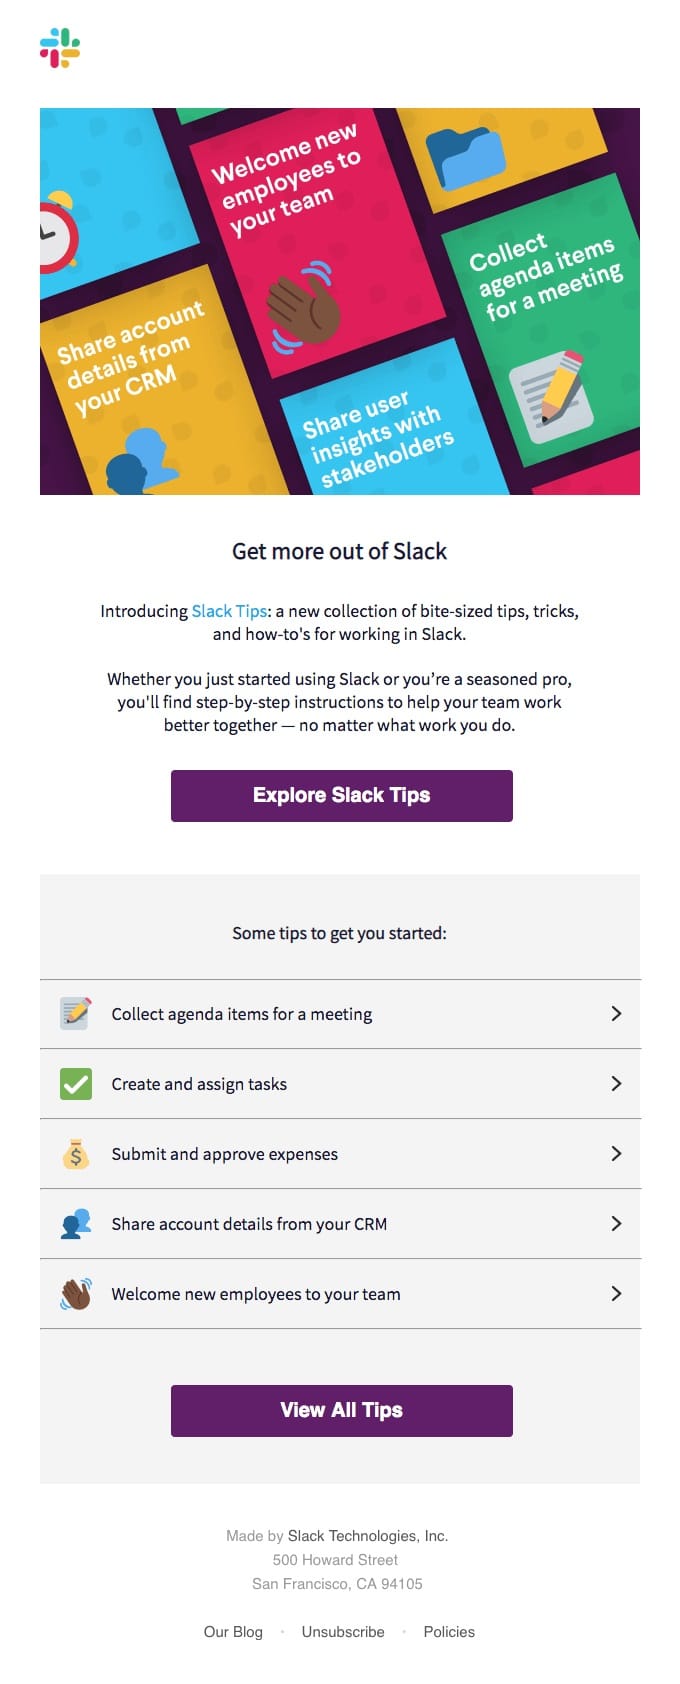 Slack does a stellar job creating images that use both popular icons and emojis to relate to their readers.